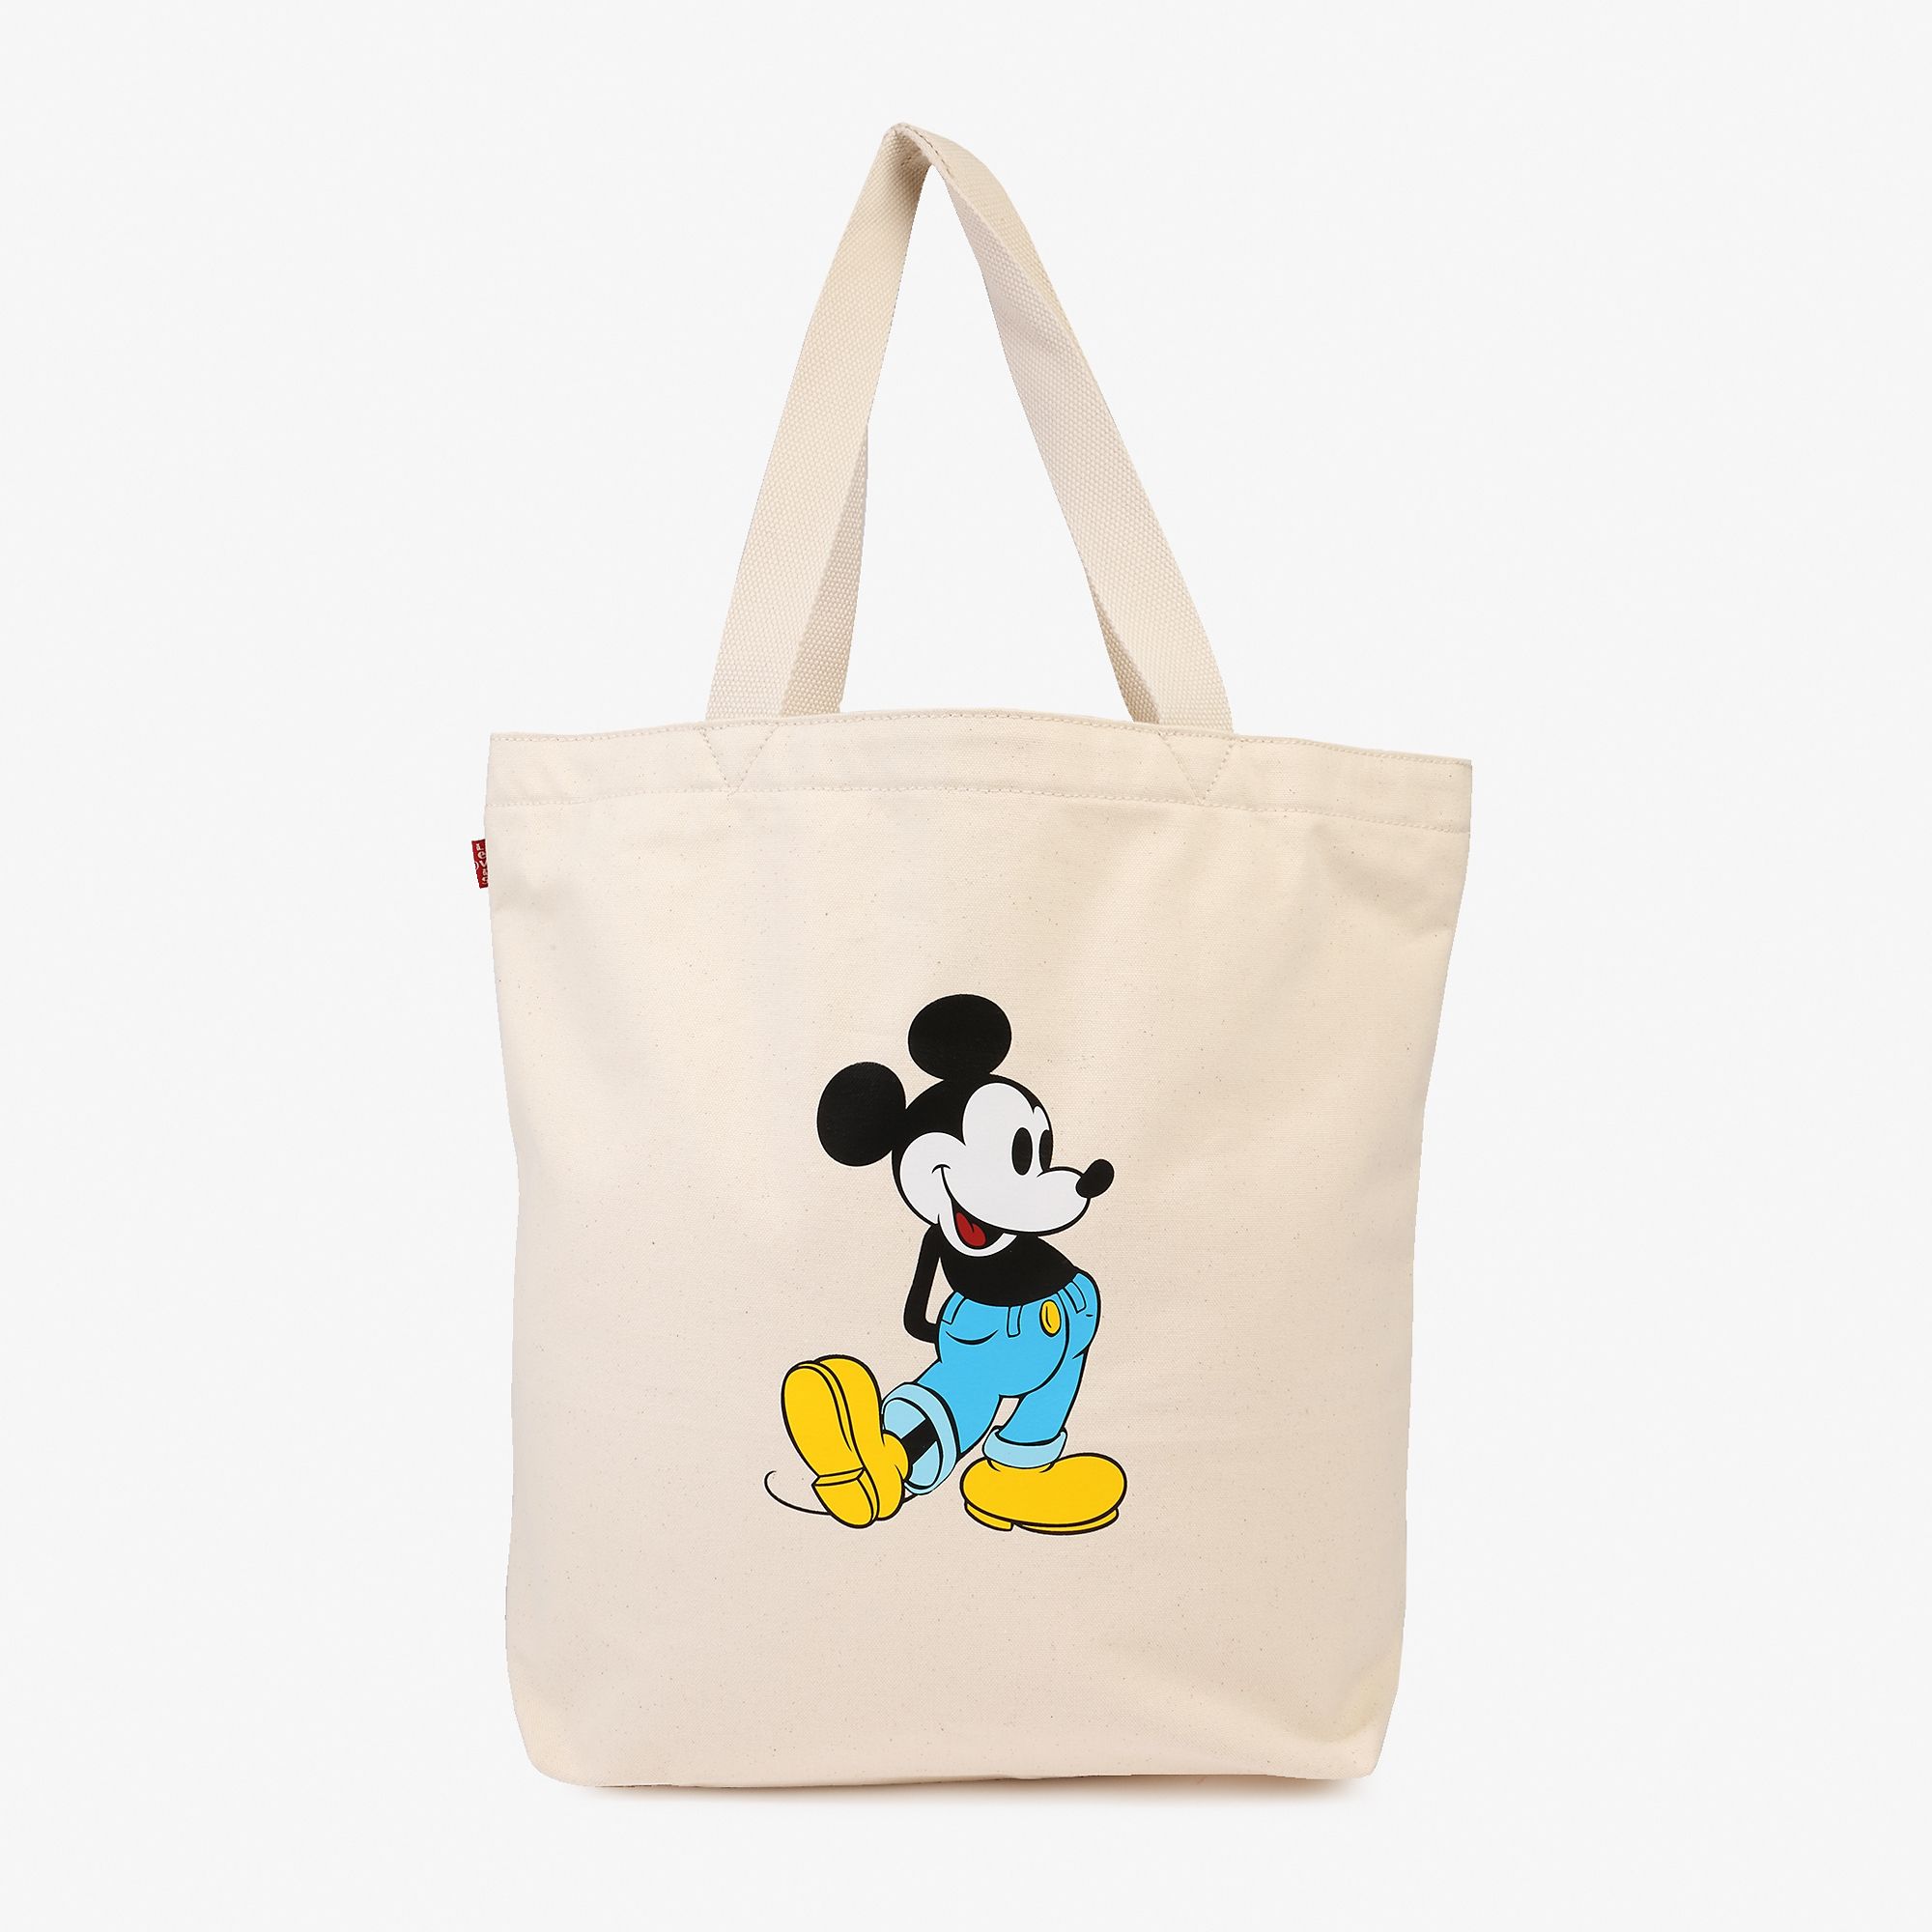  Levi's Disney Mickey Mouse Tote Bag 